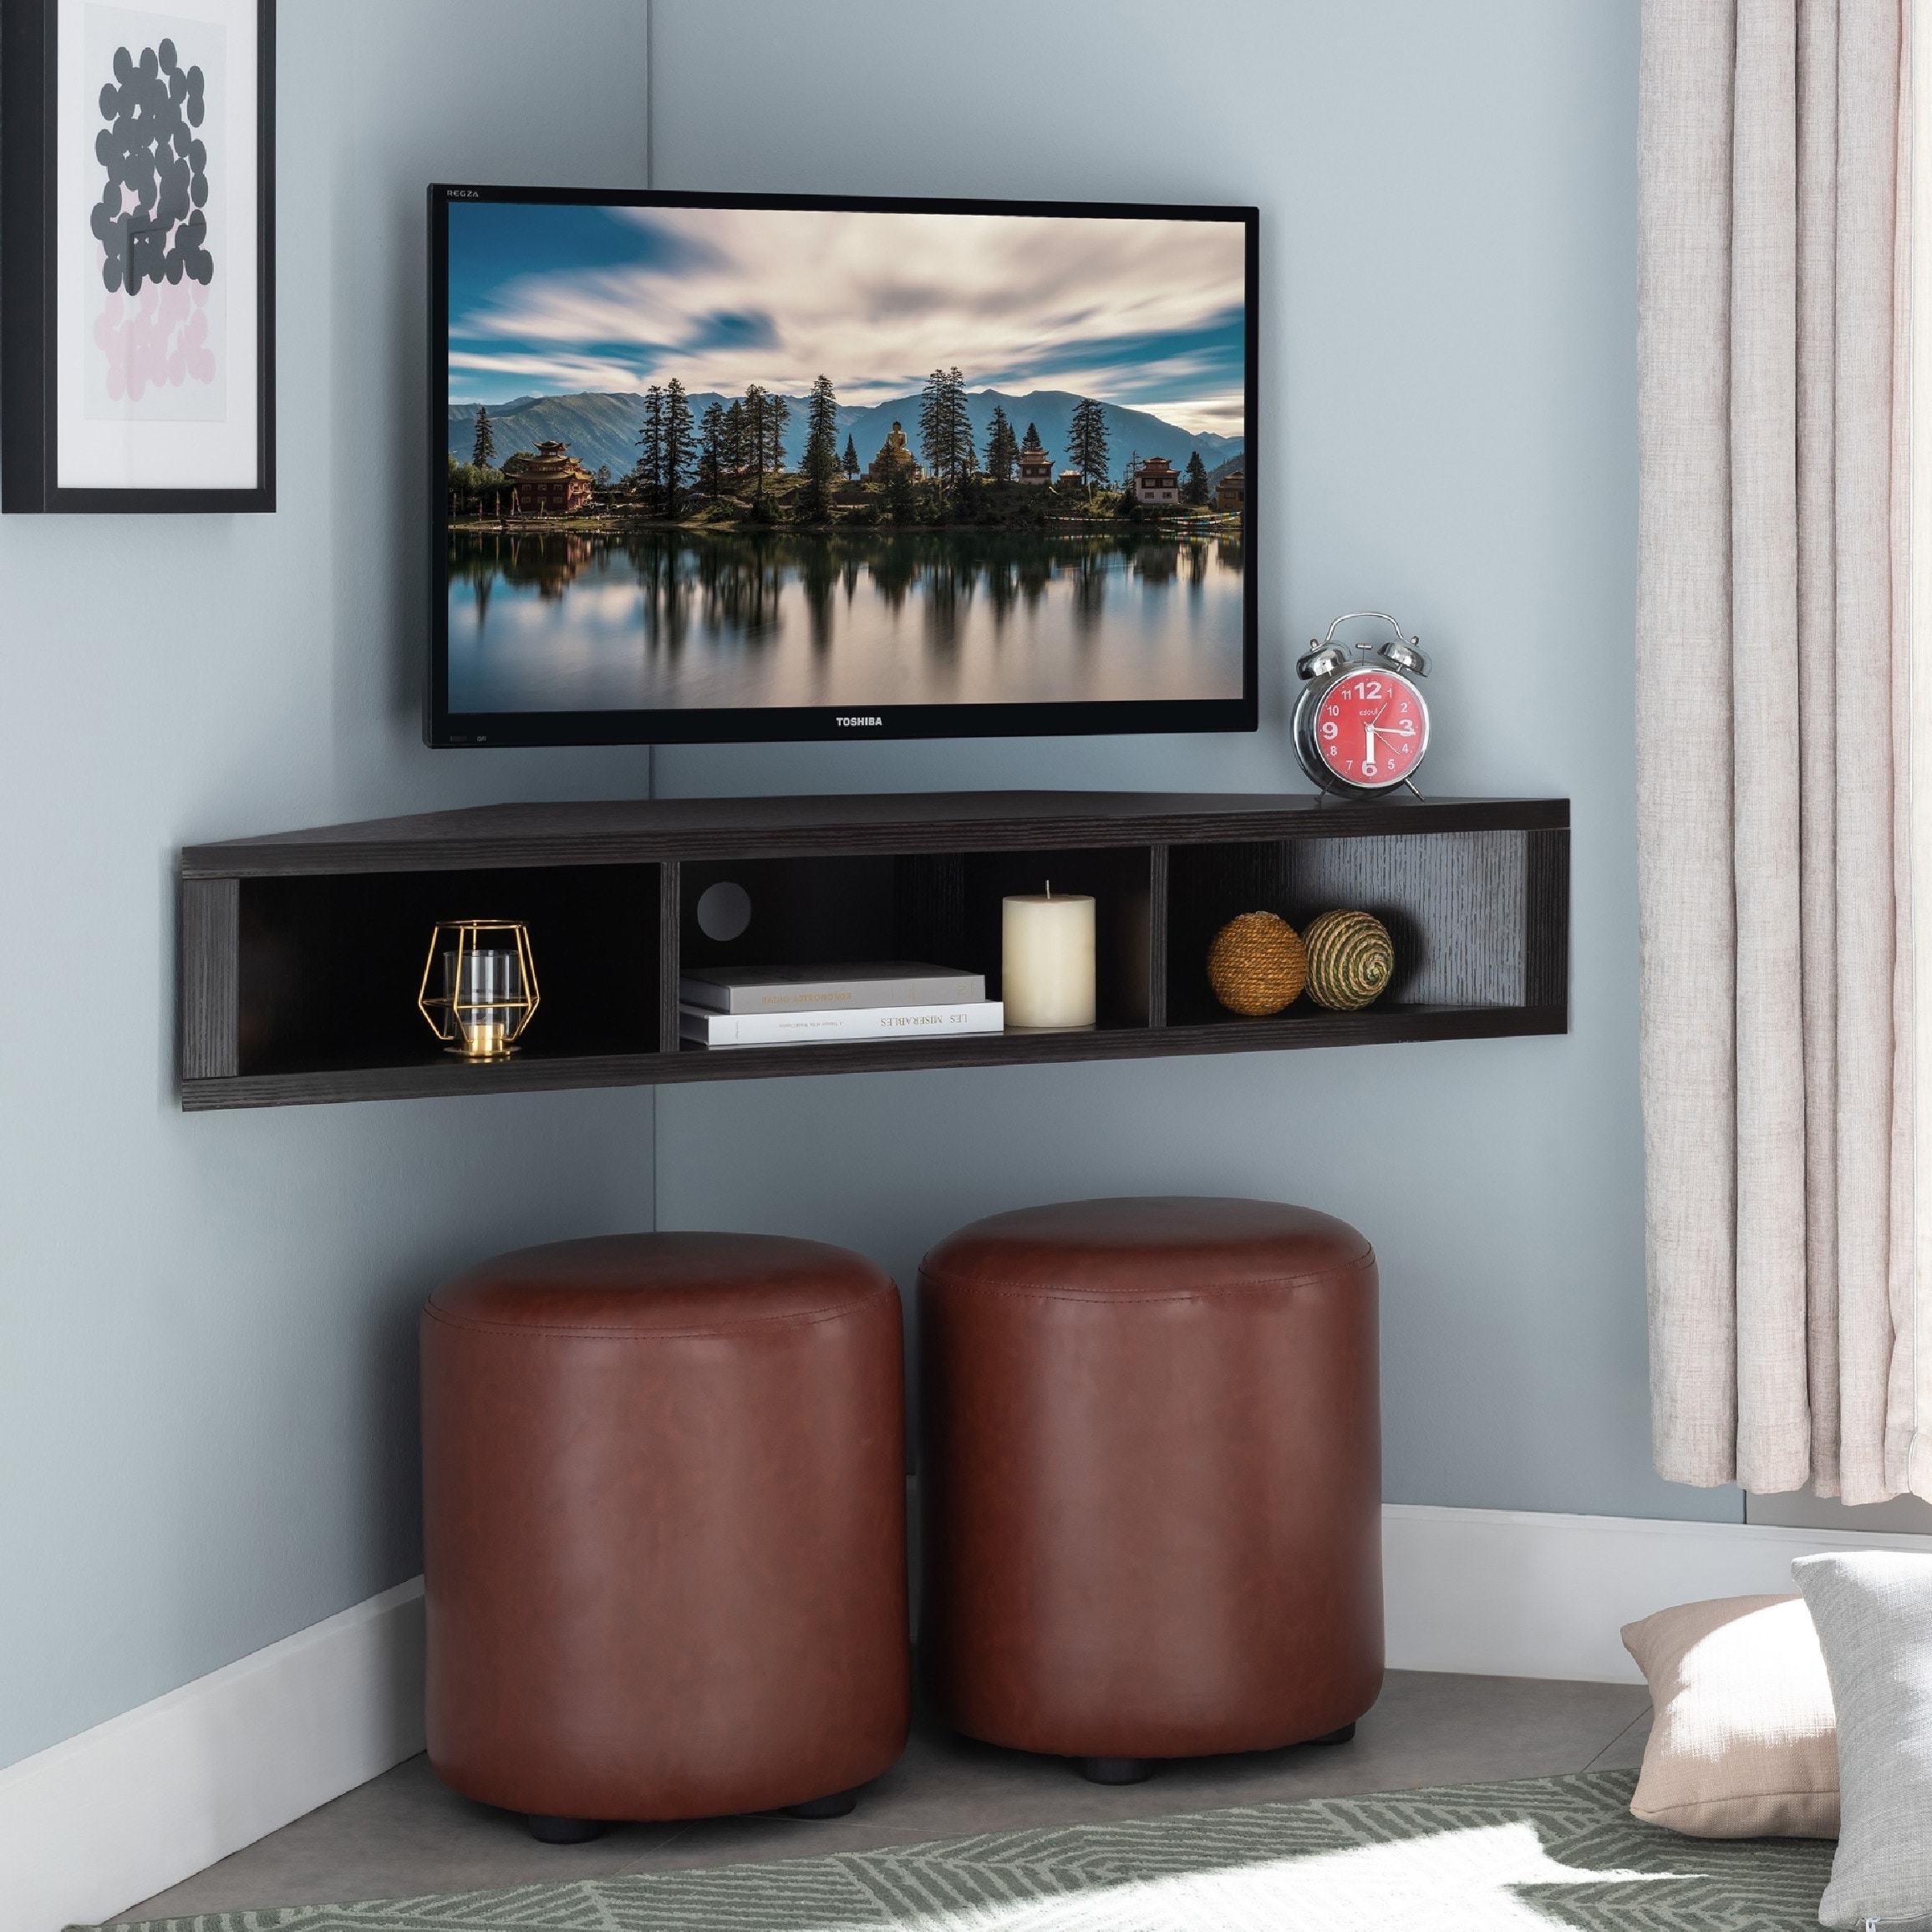 Featured image of post Wall Mounted Tv Floating Shelves - By attaching it to the wall, you will get plenty of space for your room.